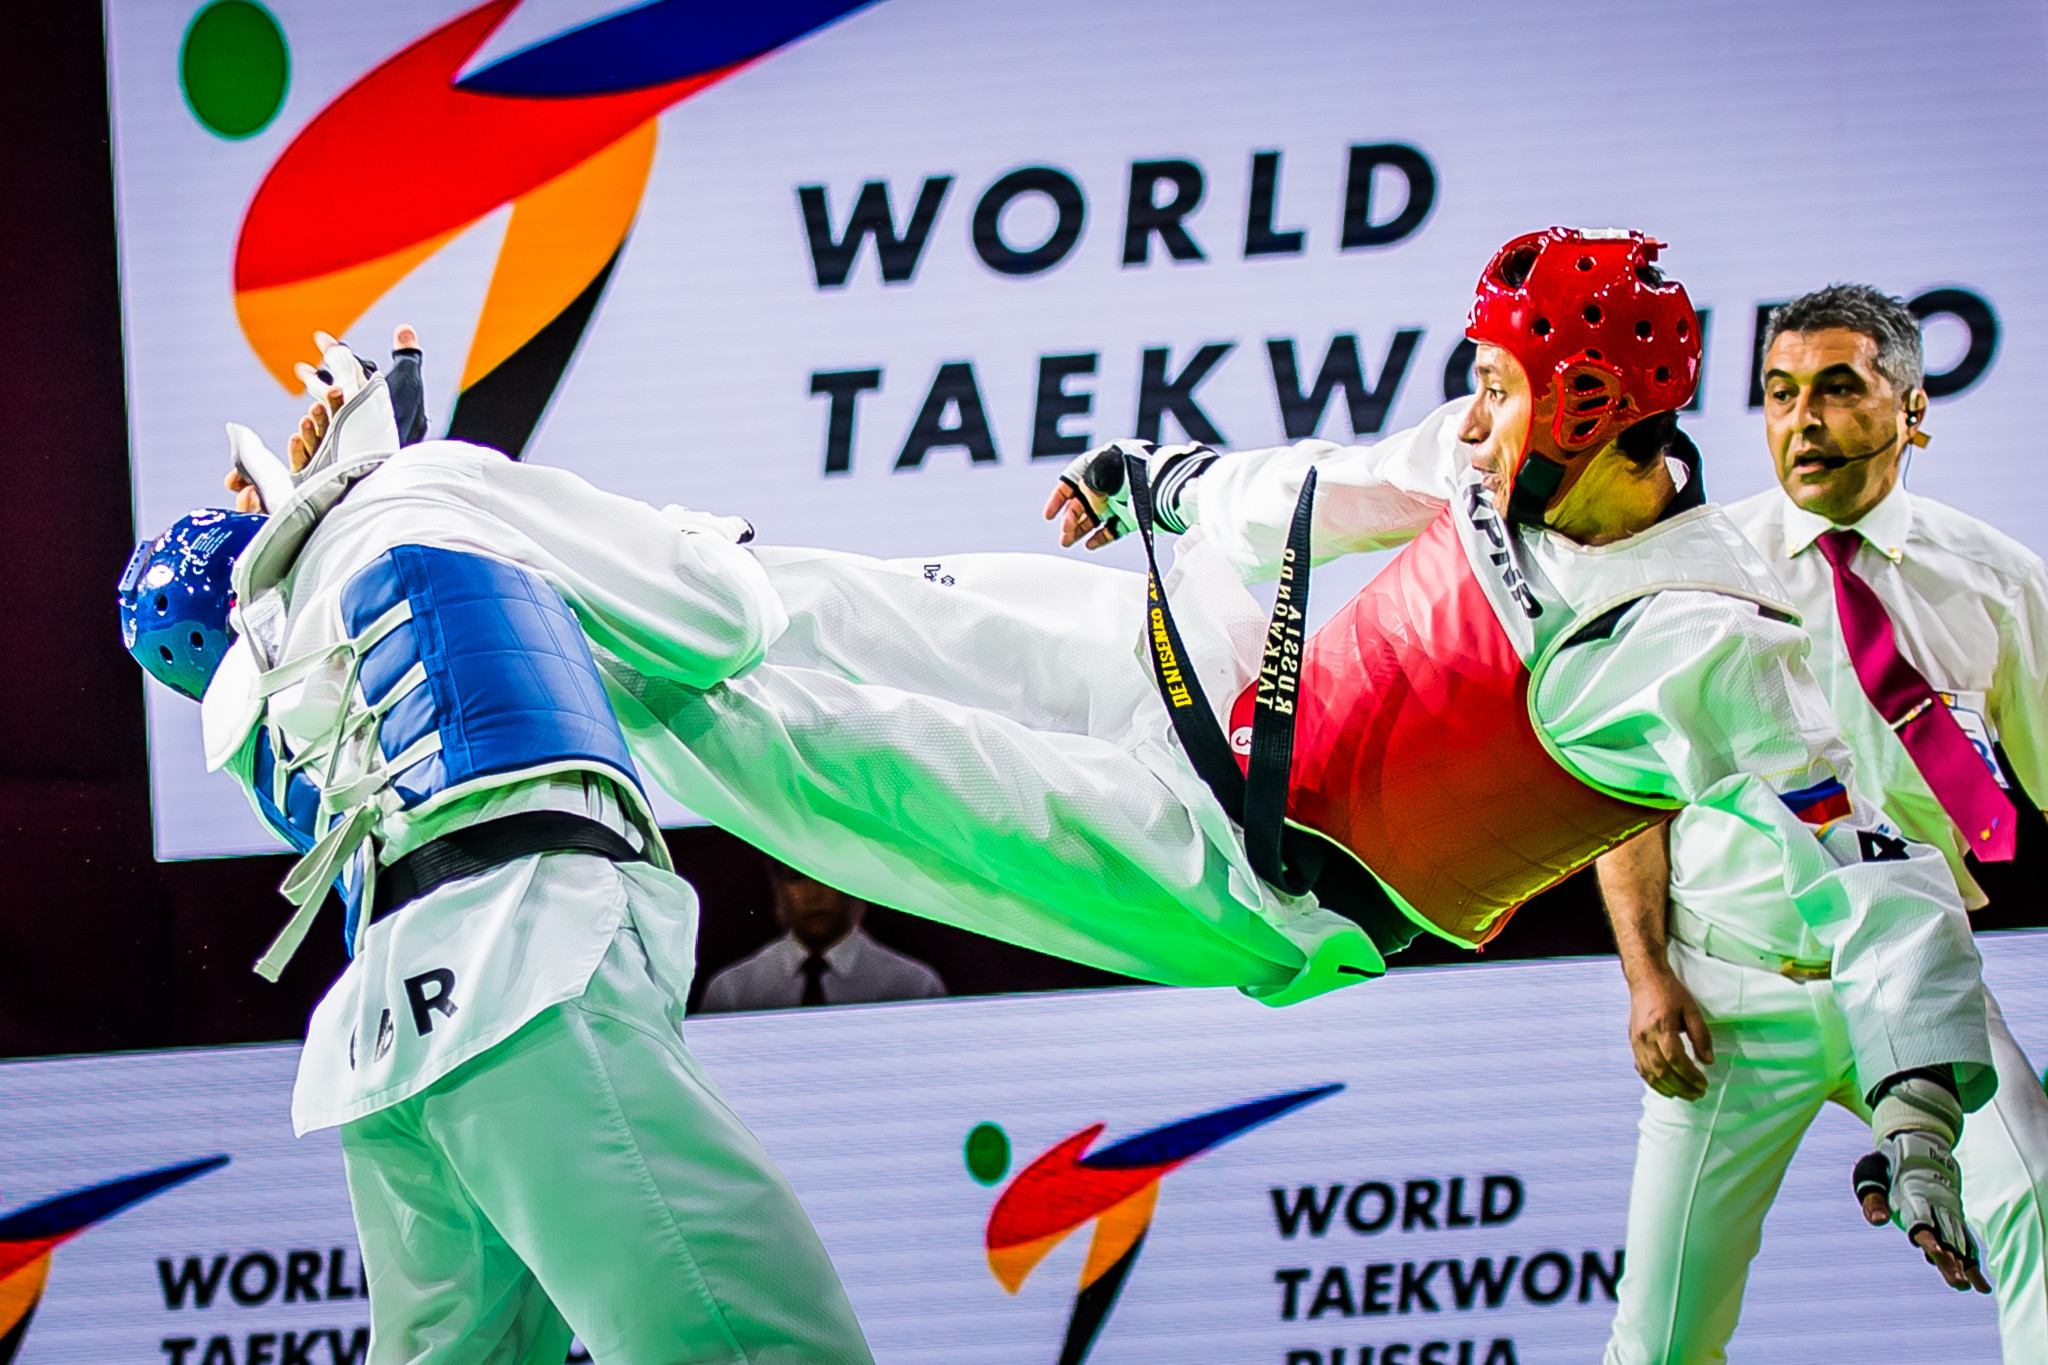 Olympic silver medallist Denisenko takes home win on opening day of World Taekwondo Grand Prix in Moscow